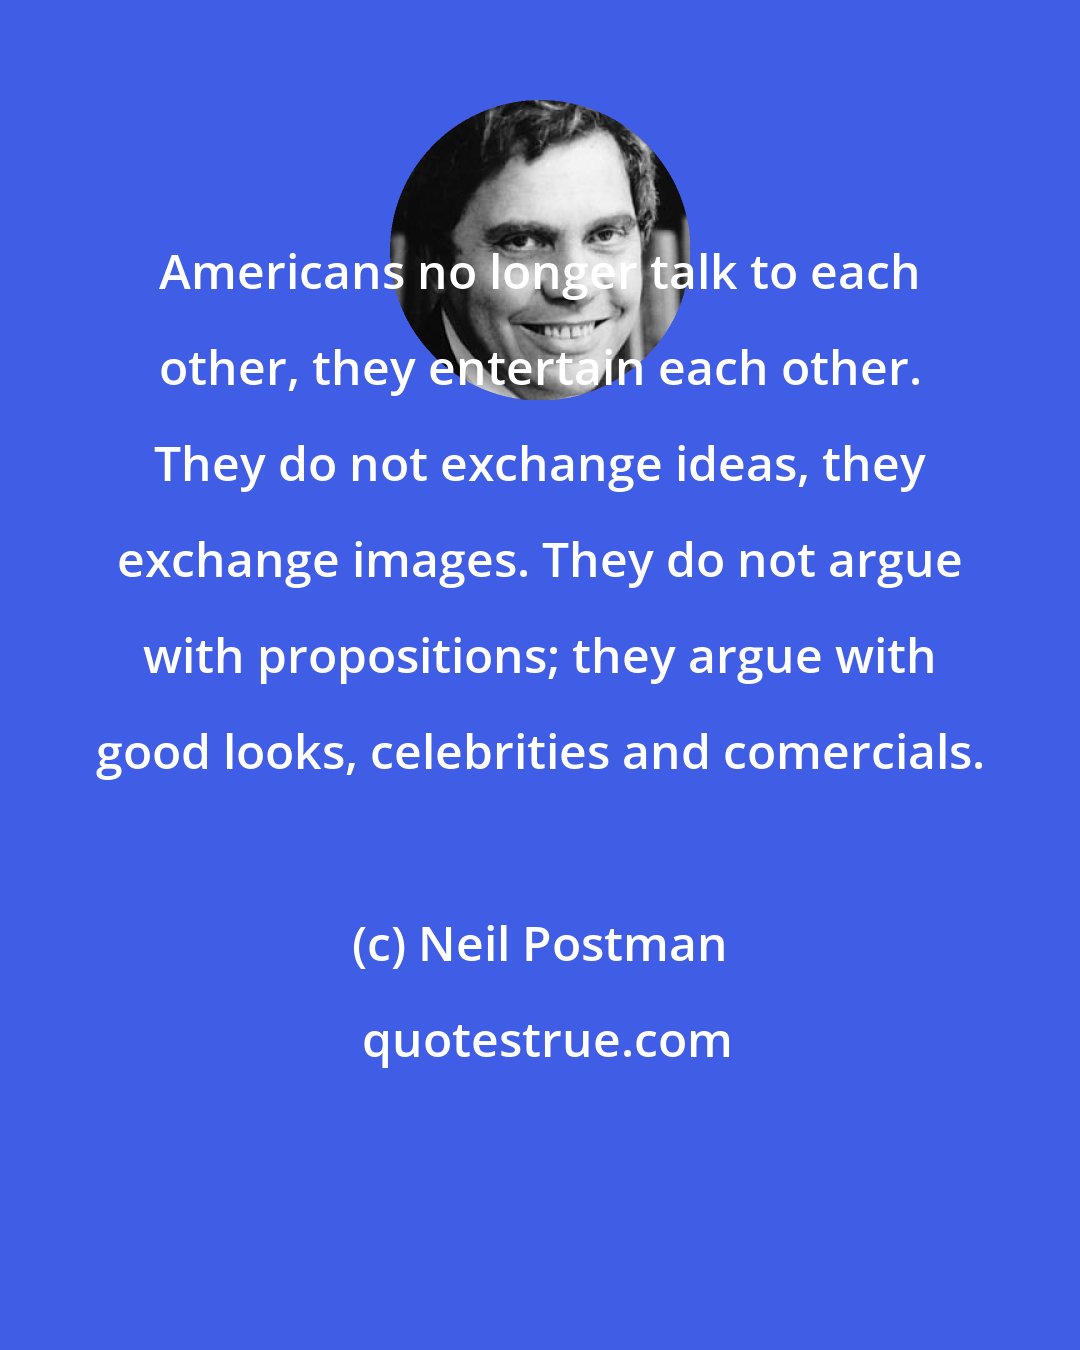 Neil Postman: Americans no longer talk to each other, they entertain each other. They do not exchange ideas, they exchange images. They do not argue with propositions; they argue with good looks, celebrities and comercials.